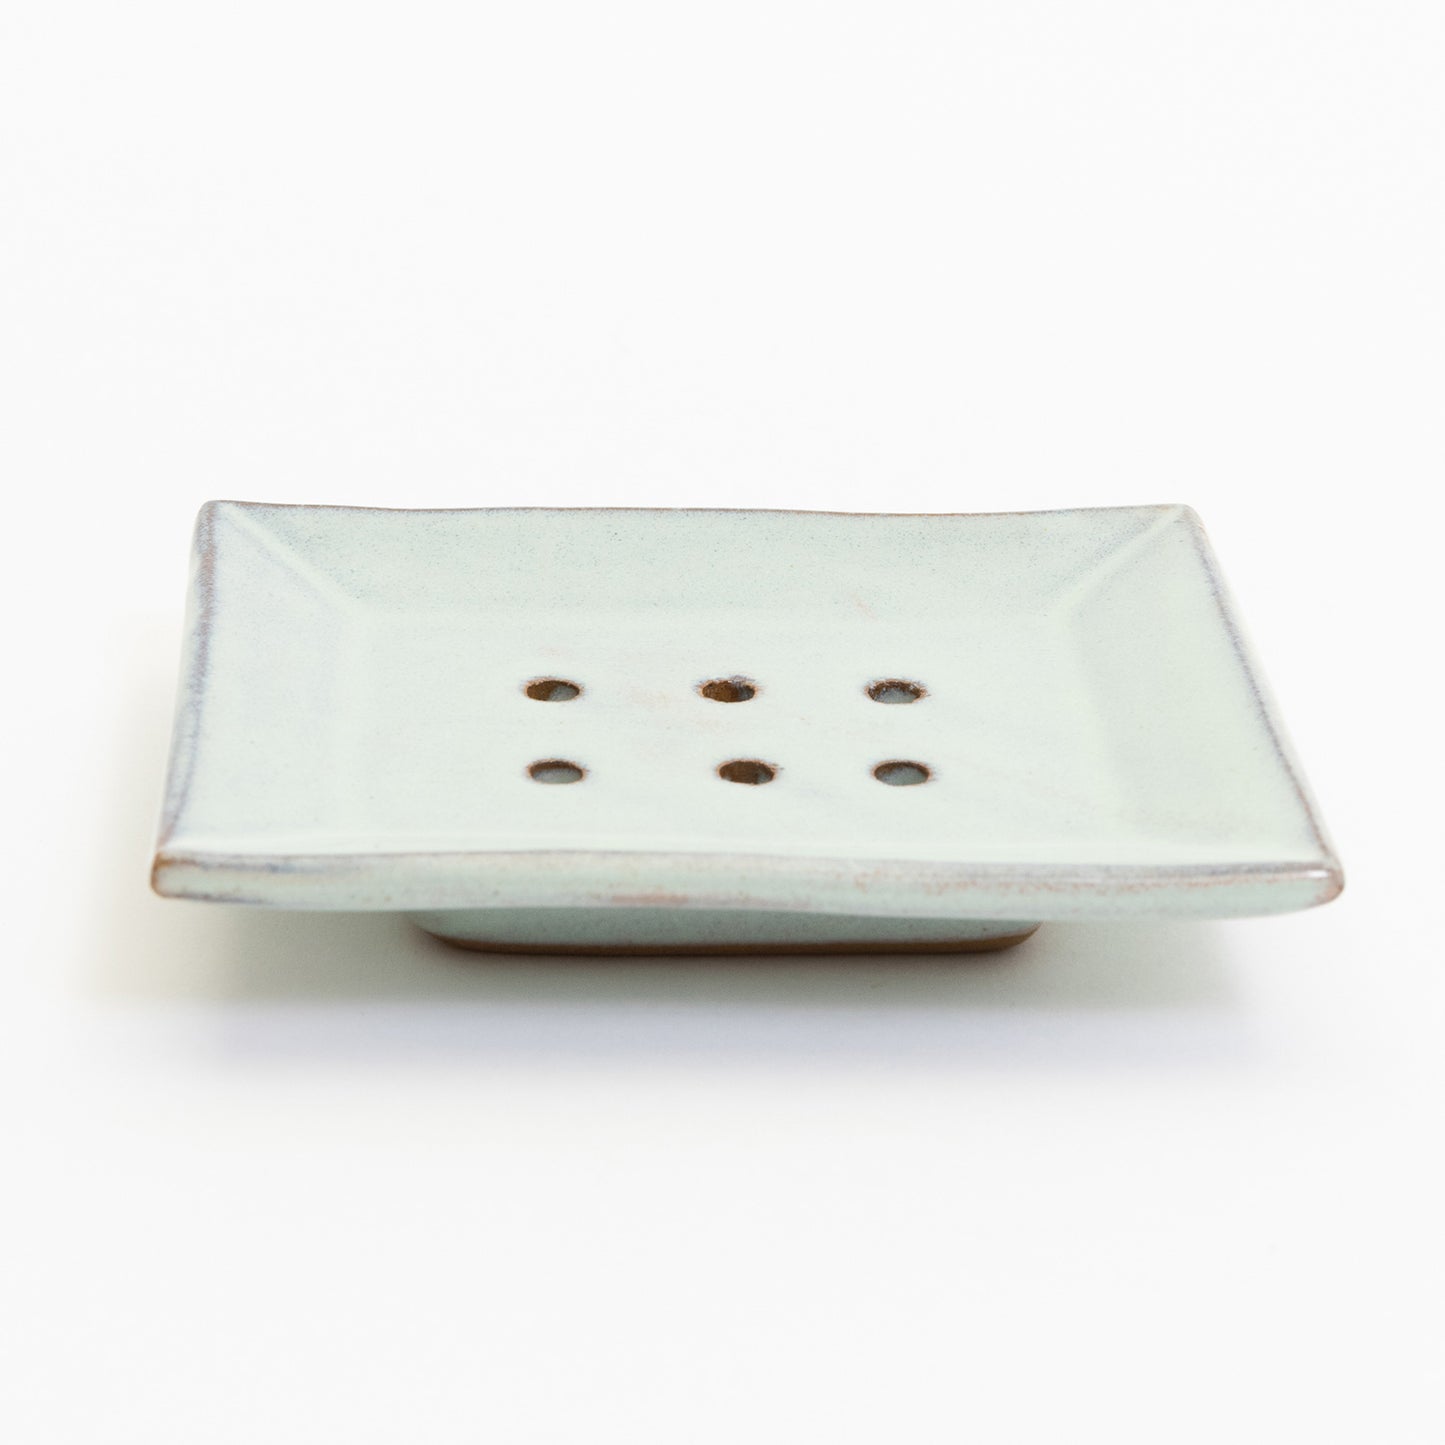 A stoneware soap dish in ice blue colour. Pictured on a white background.